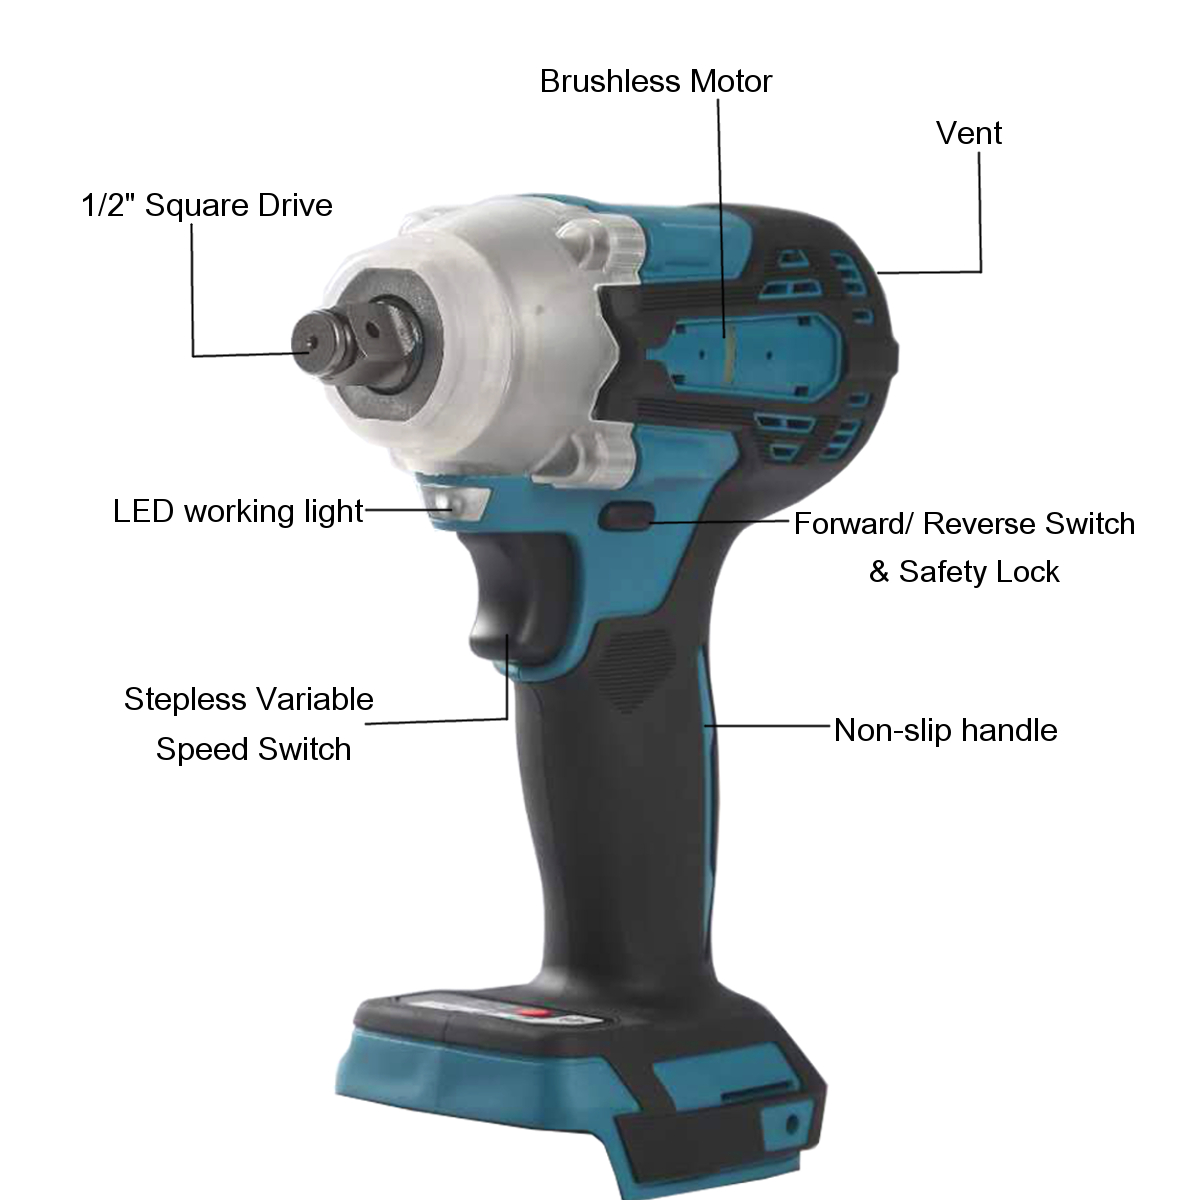 800Nm-Brushless-Cordless-12-Impact-Wrench-Driver-Replacement-for-Makita-18V-Battery-1765713-10